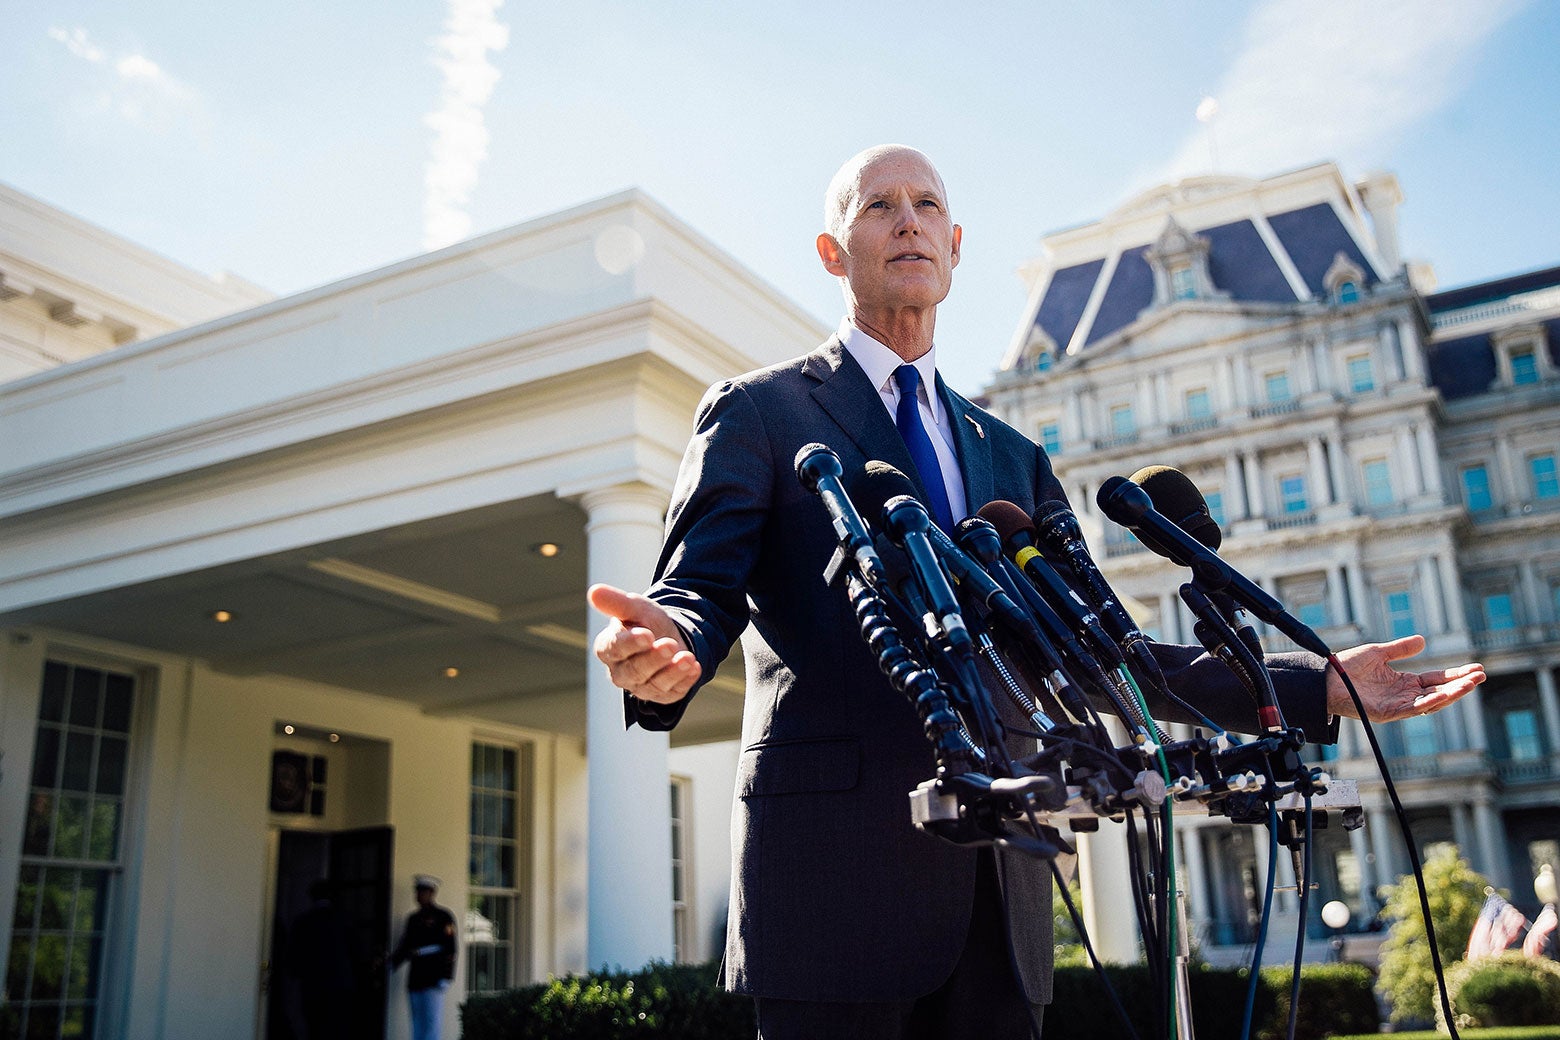 Florida Gov. Rick Scott speaks to reporters following his meeting with President Donald Trump at the White House on Sept. 29.